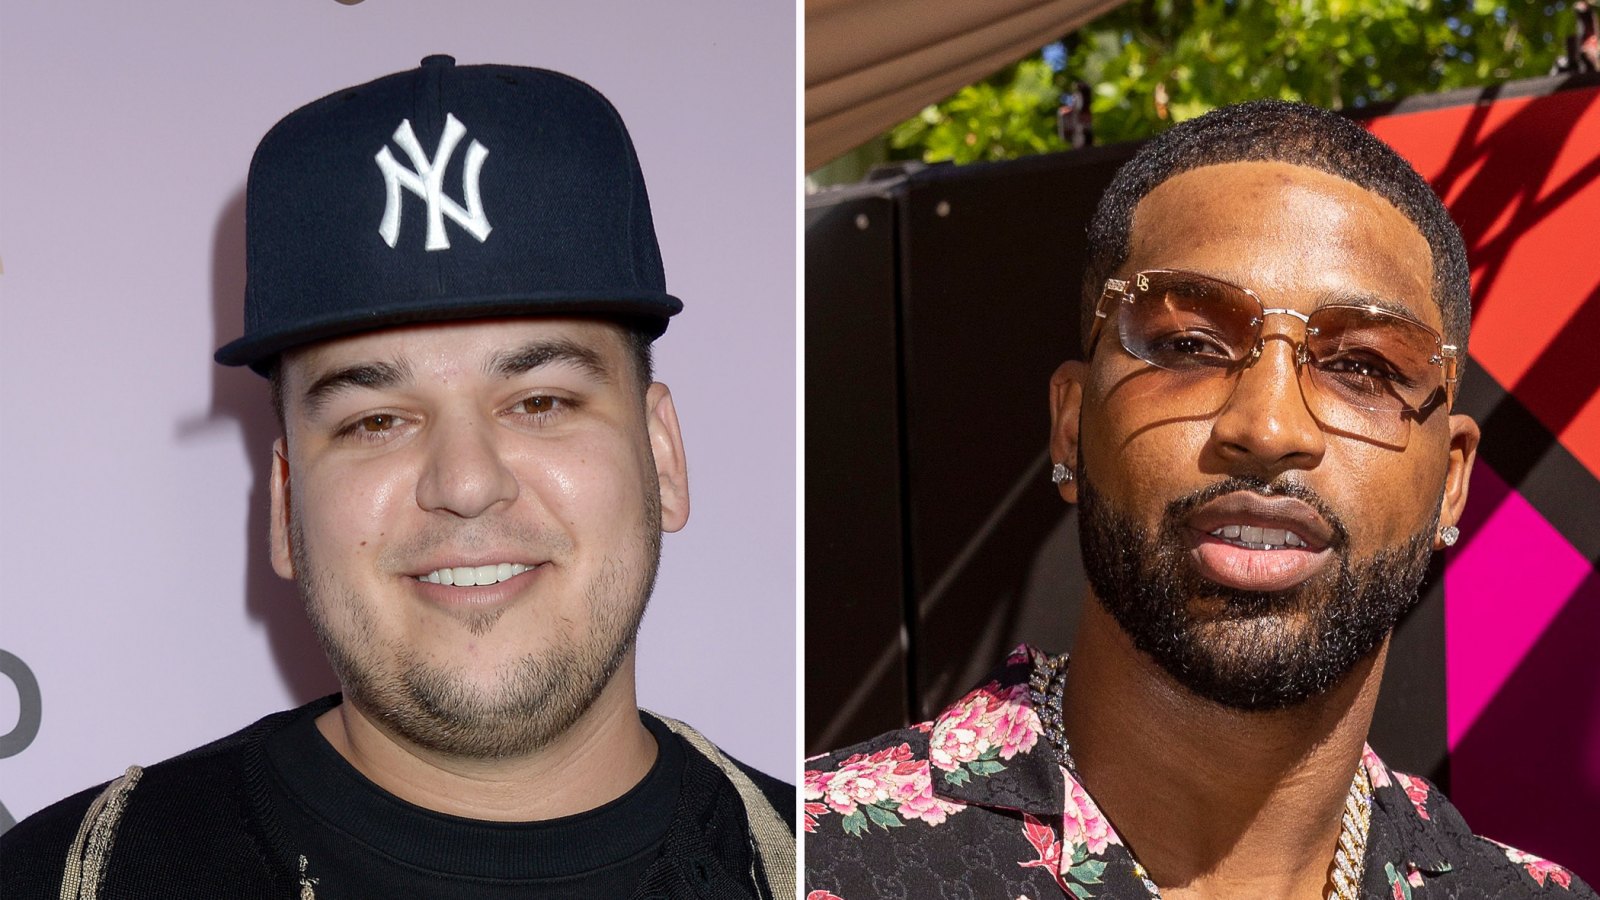 Rob Kardashian Shows His Support for Tristan Thompson Signing With the Lakers: ‘Let’s Gooo’